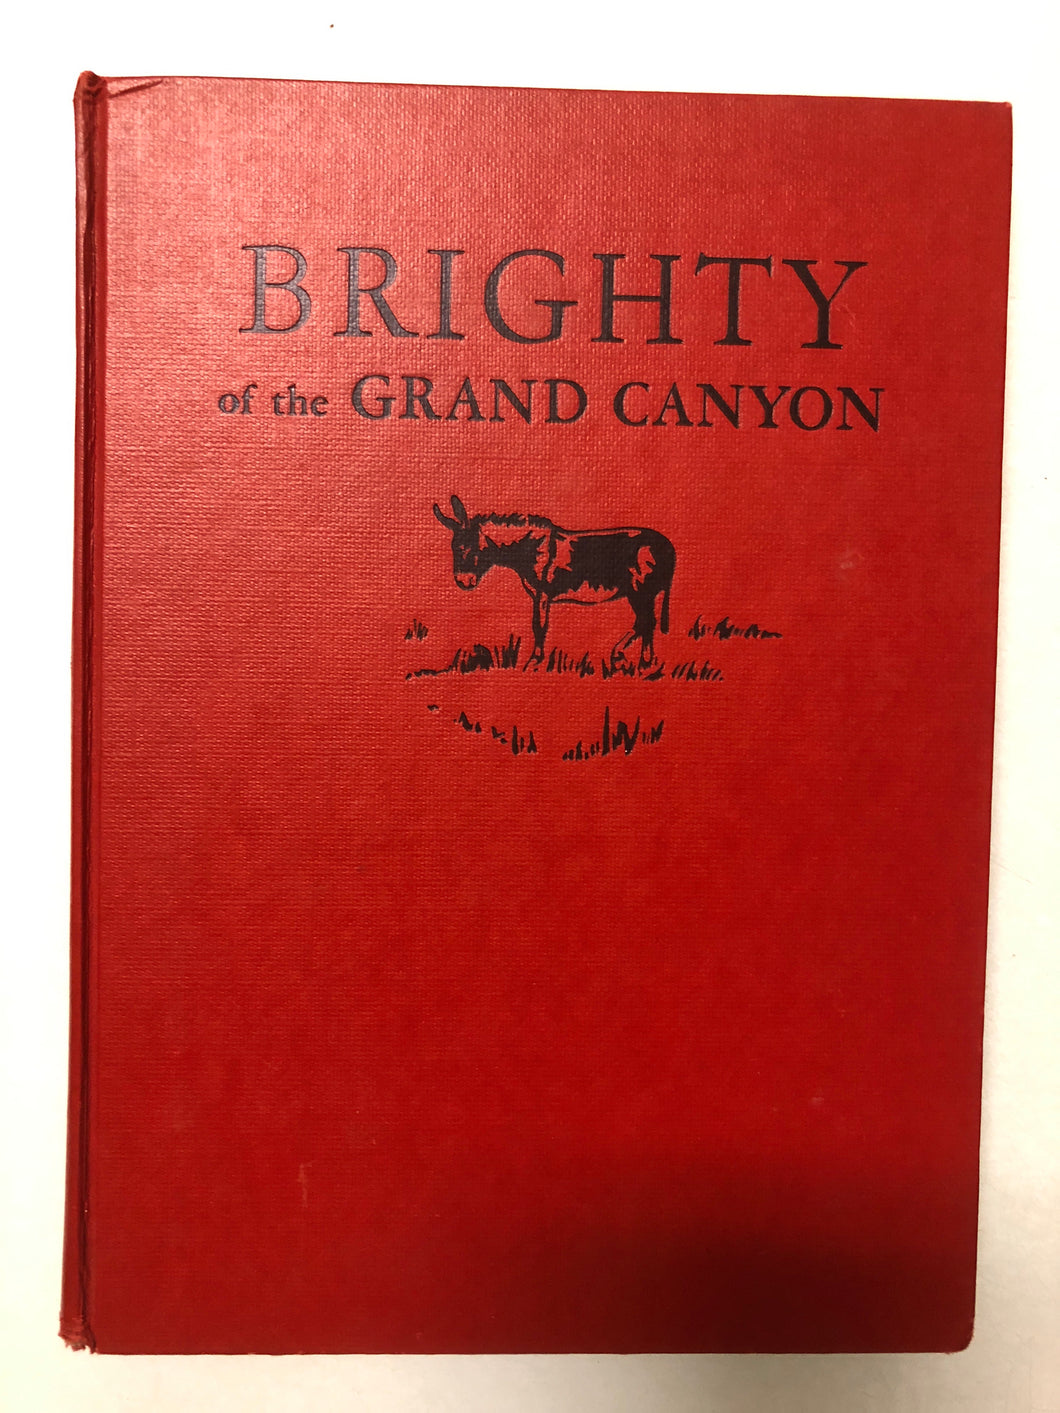 Brighty of the Grand Canyon - Slick Cat Books 